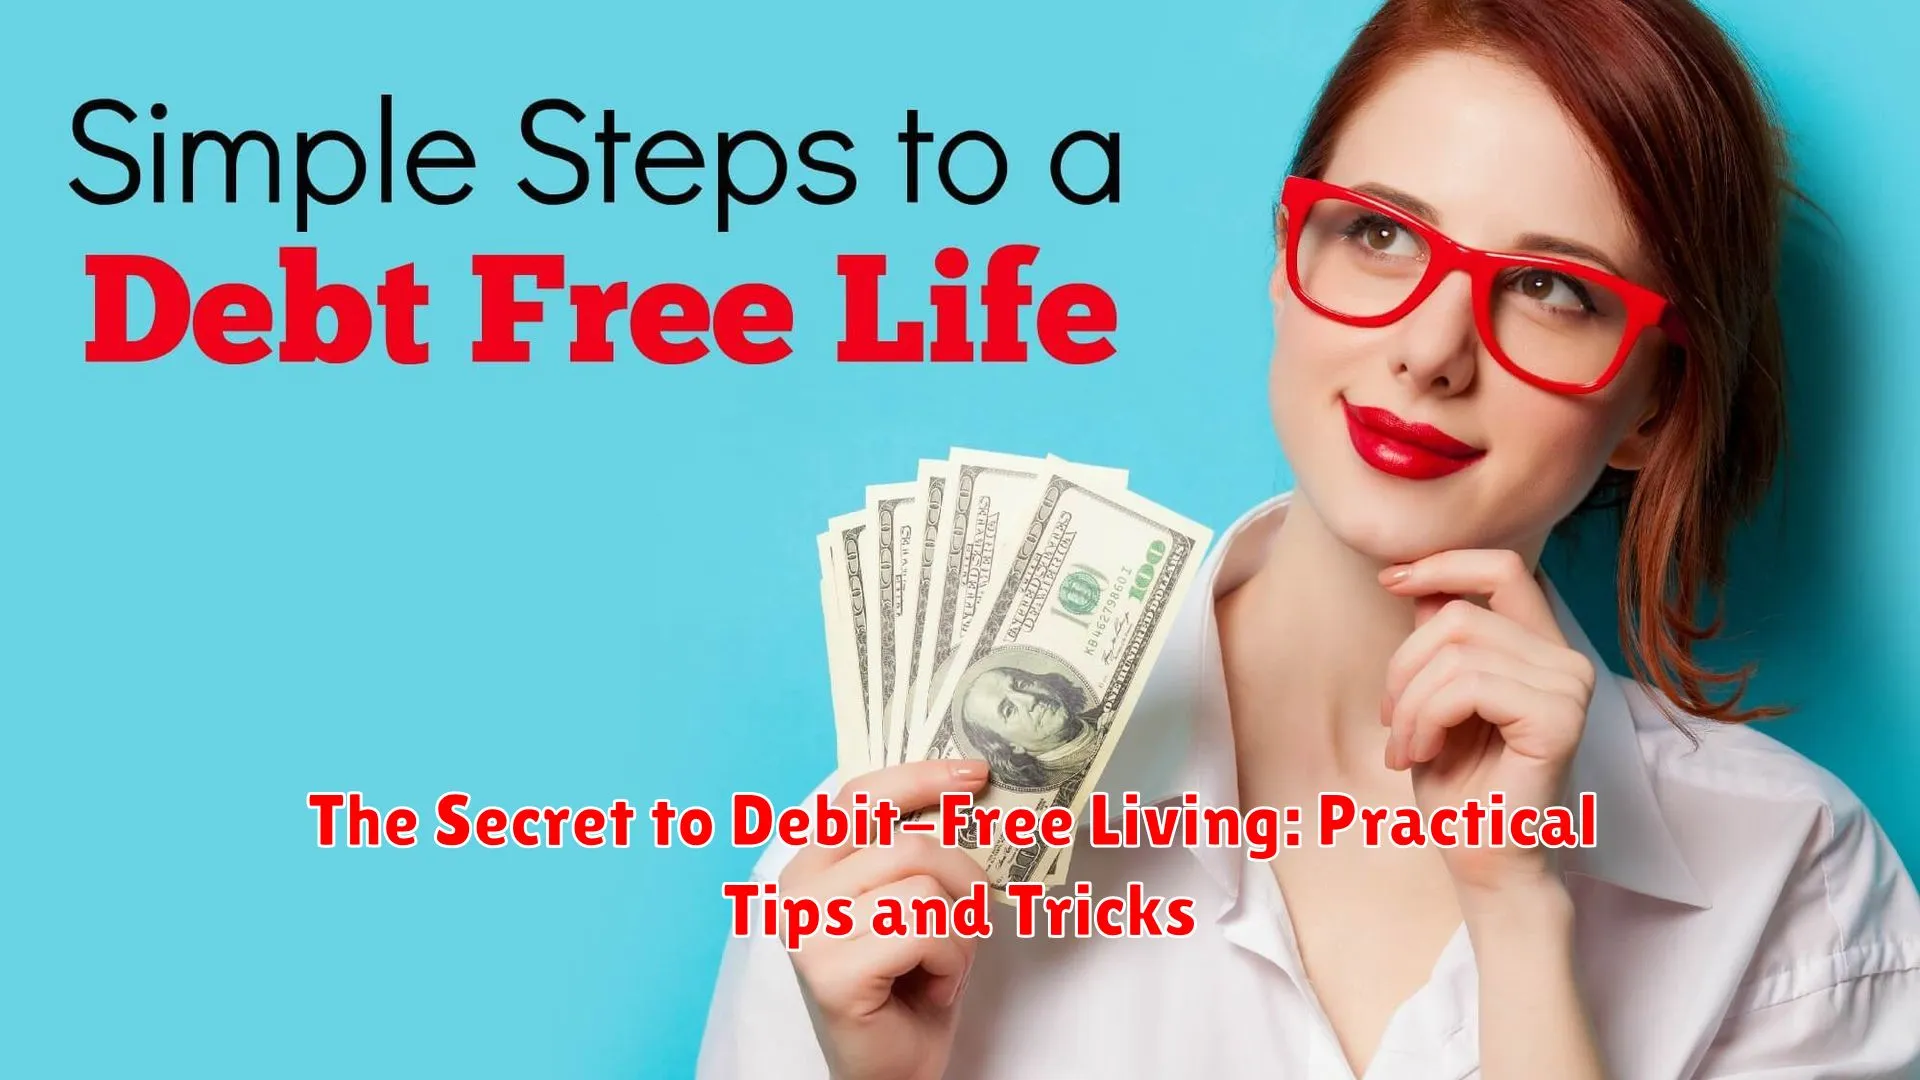 The Secret to Debit-Free Living: Practical Tips and Tricks